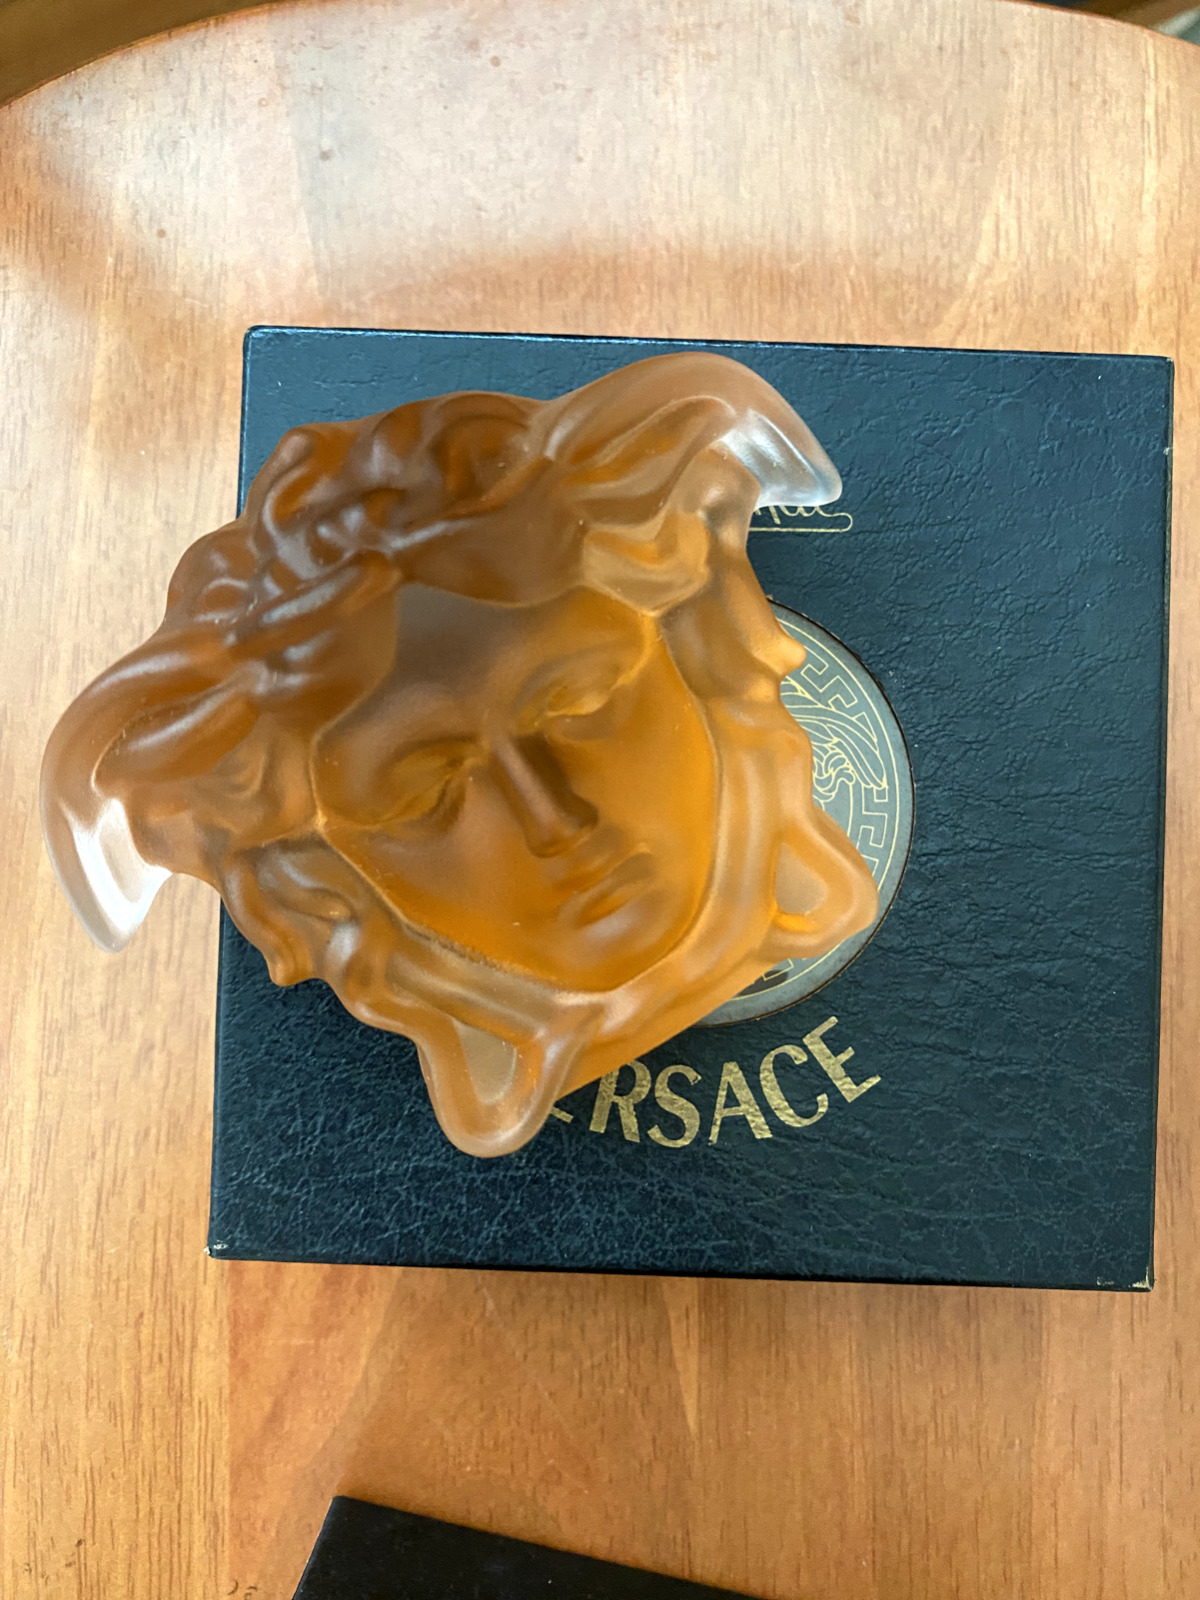 VERSACE ROSENTHAL MEDUSA, PAPERWEIGHT OFFICE HOME TABLE, DECOR